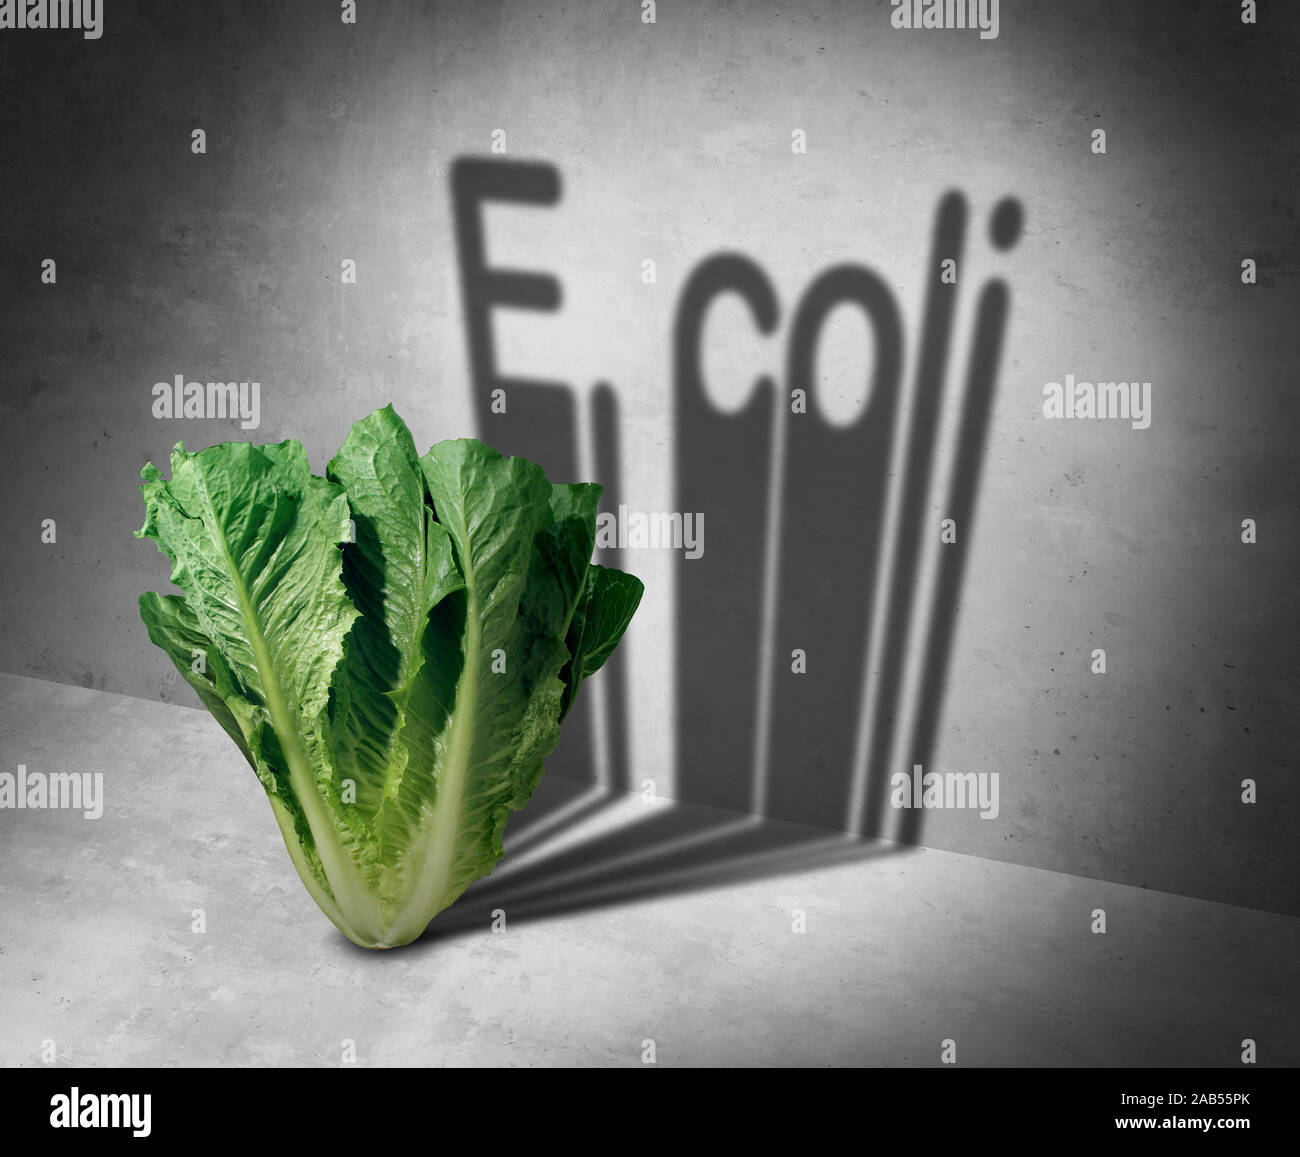 E coli contaminated romaine lettuce and vegetable bacteria danger as a health risk of eating raw food as a public safety concept. Stock Photo